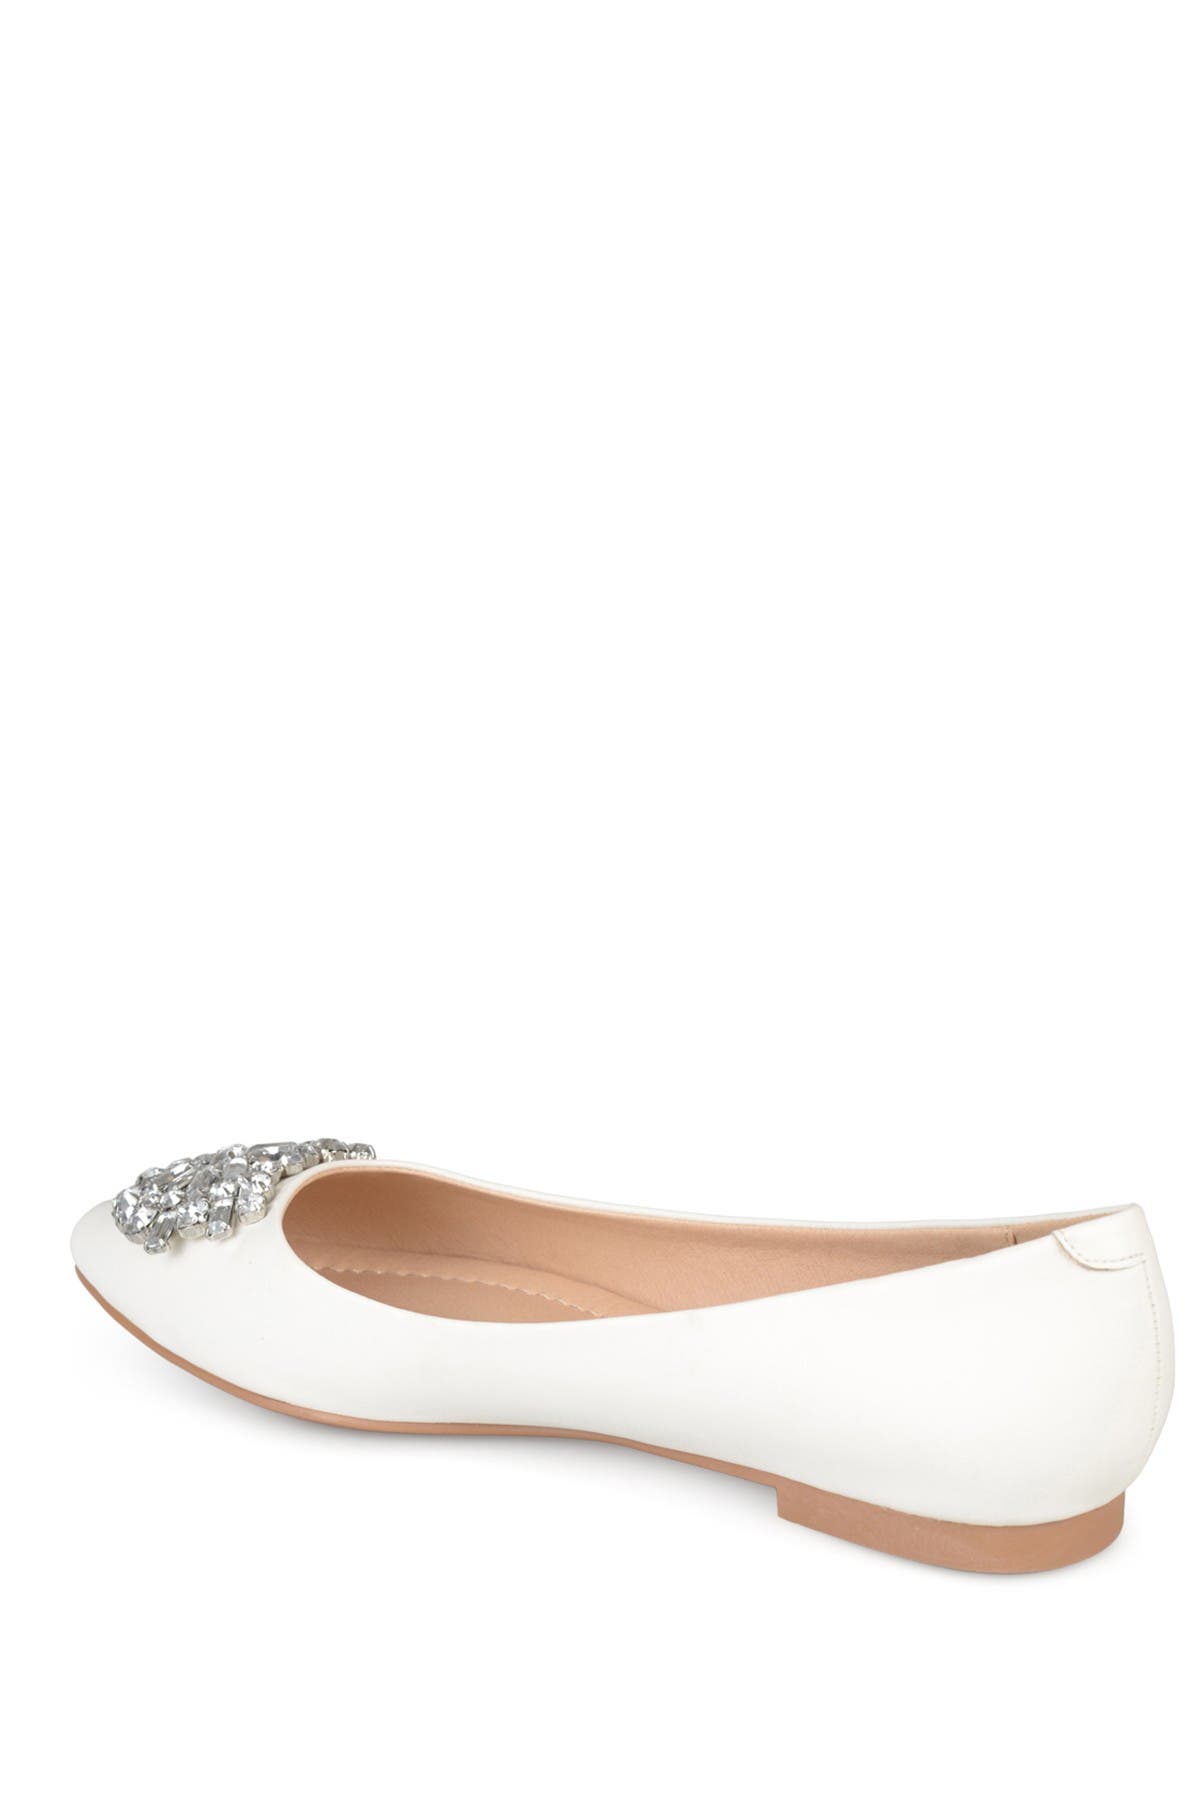 Journee Collection Renzo Embellished Flat In Light Beige4